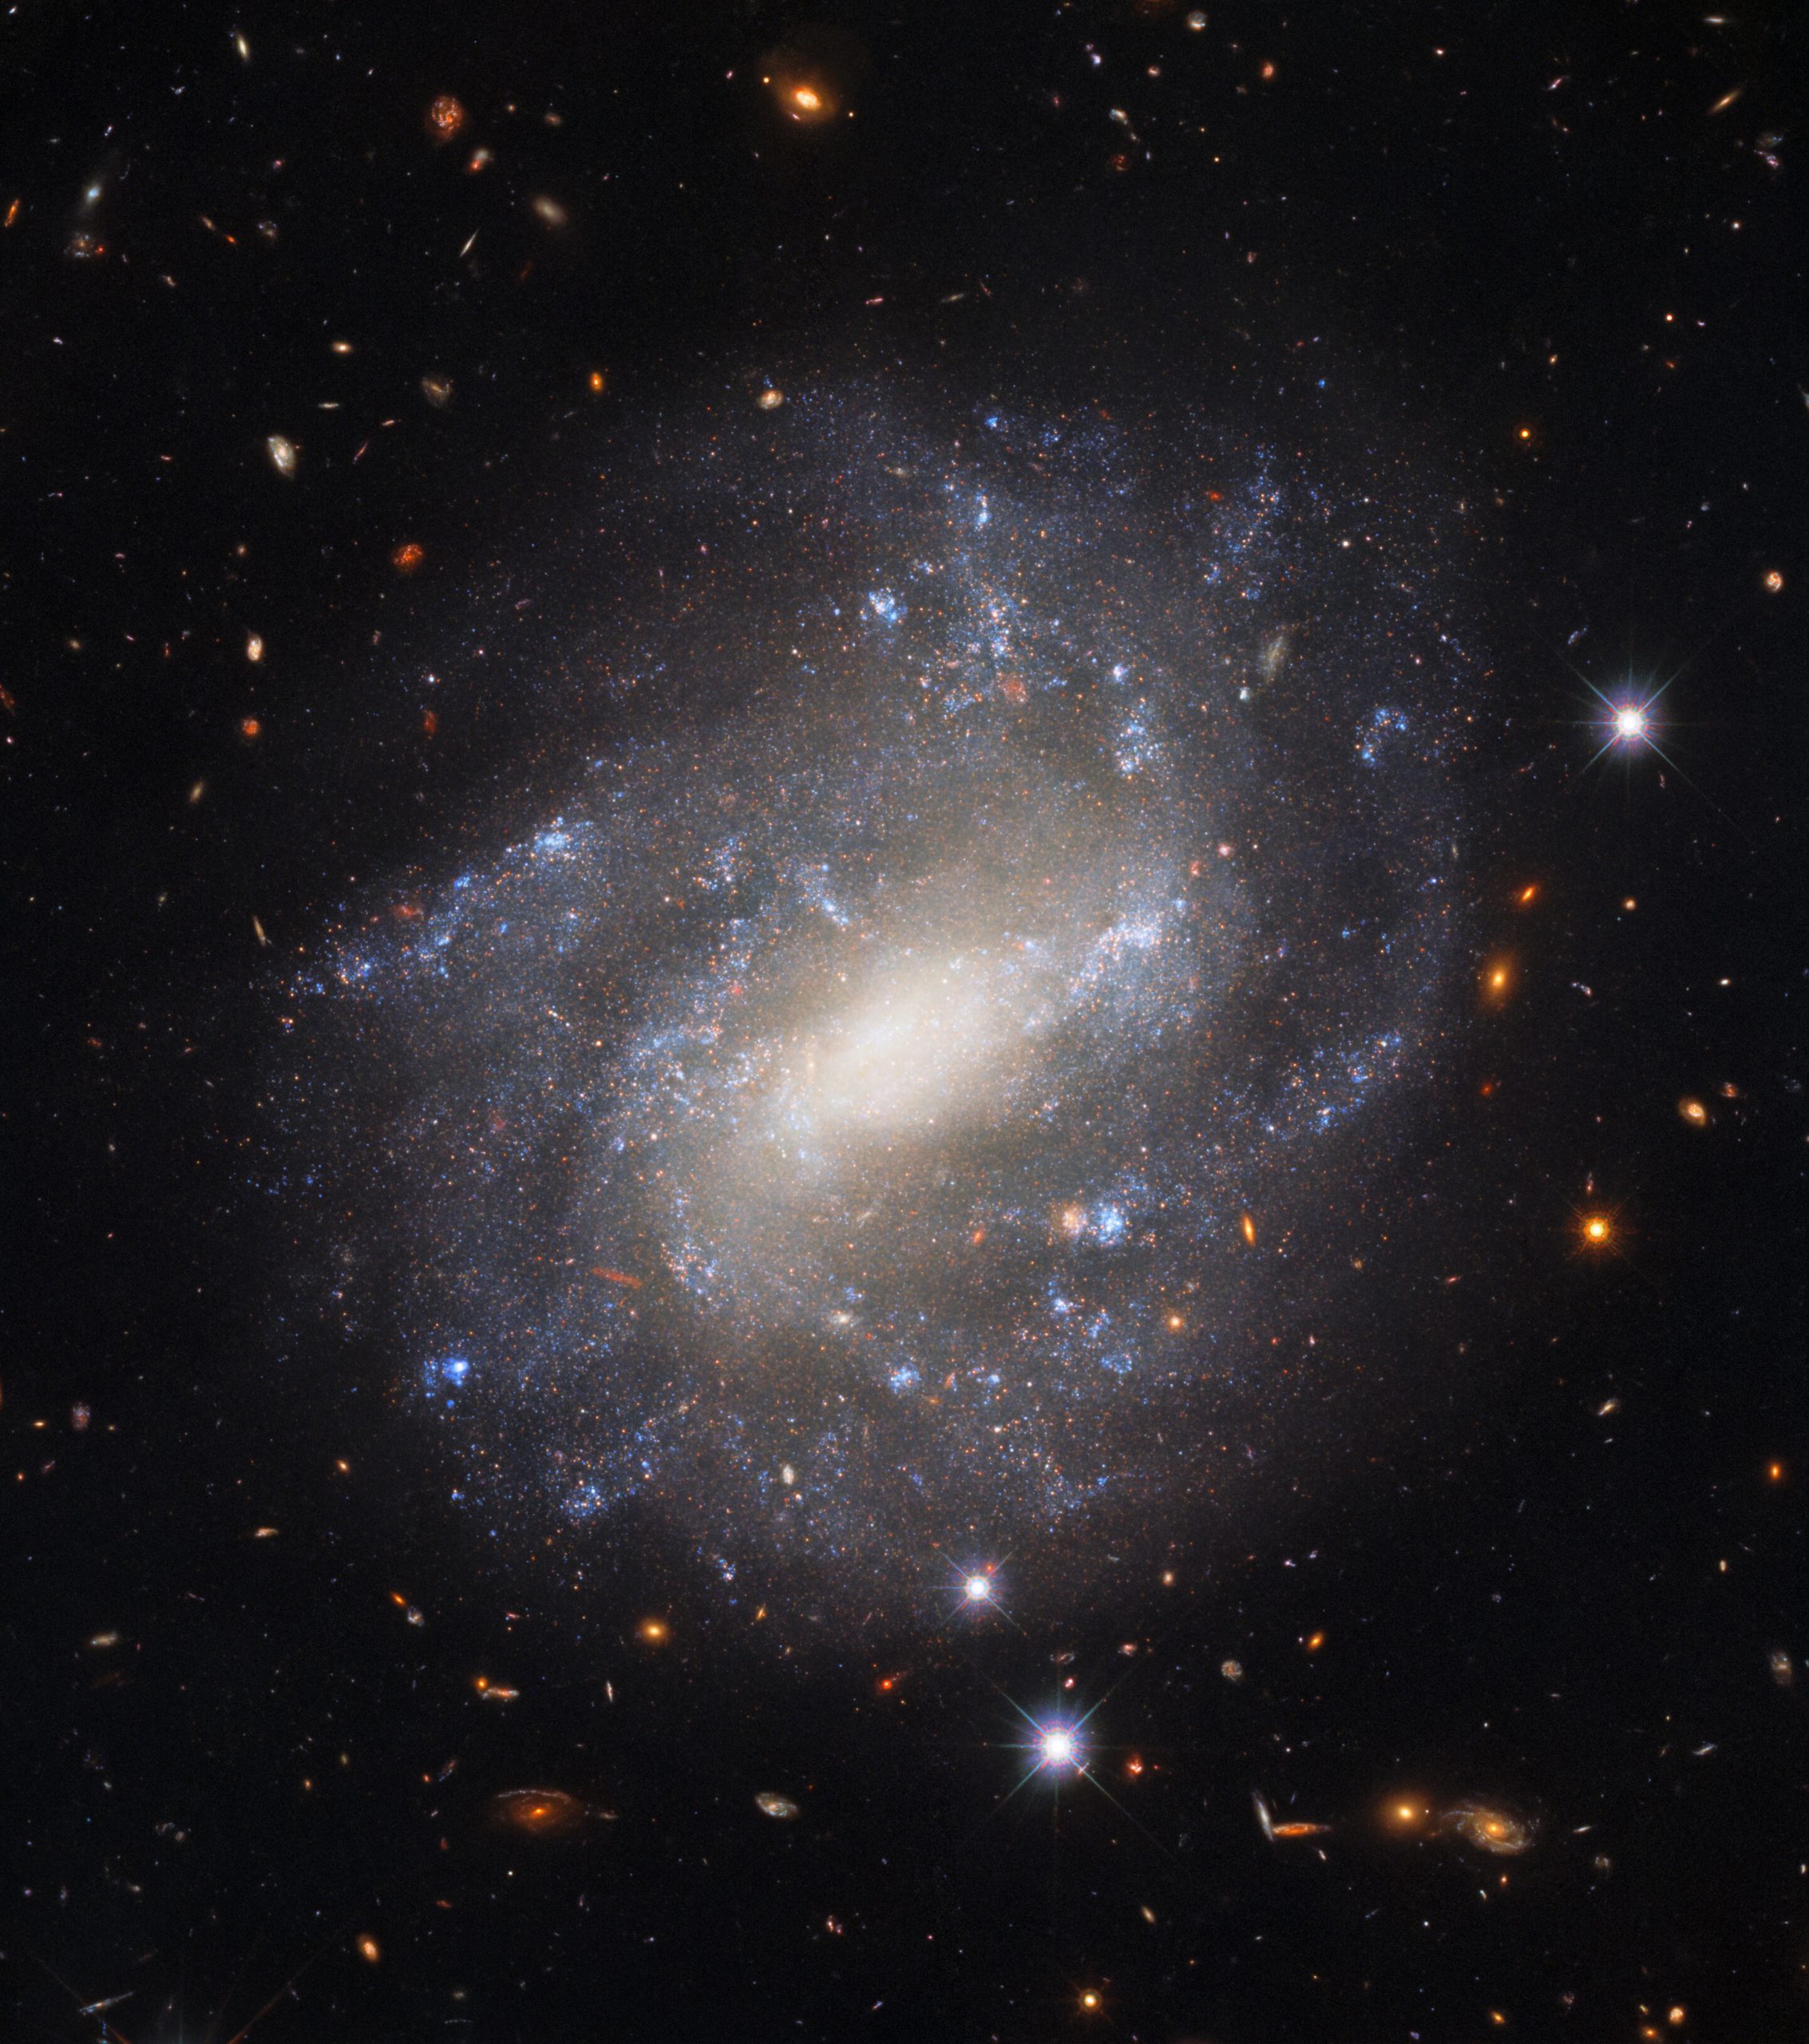 This stunning photograph taken by the Hubble Space Telescope shows UGC 9391, a galaxy located some 130 million light-years from Earth. Image Credit: Image credit: ESA/Hubble & NASA, A. Riess et al.